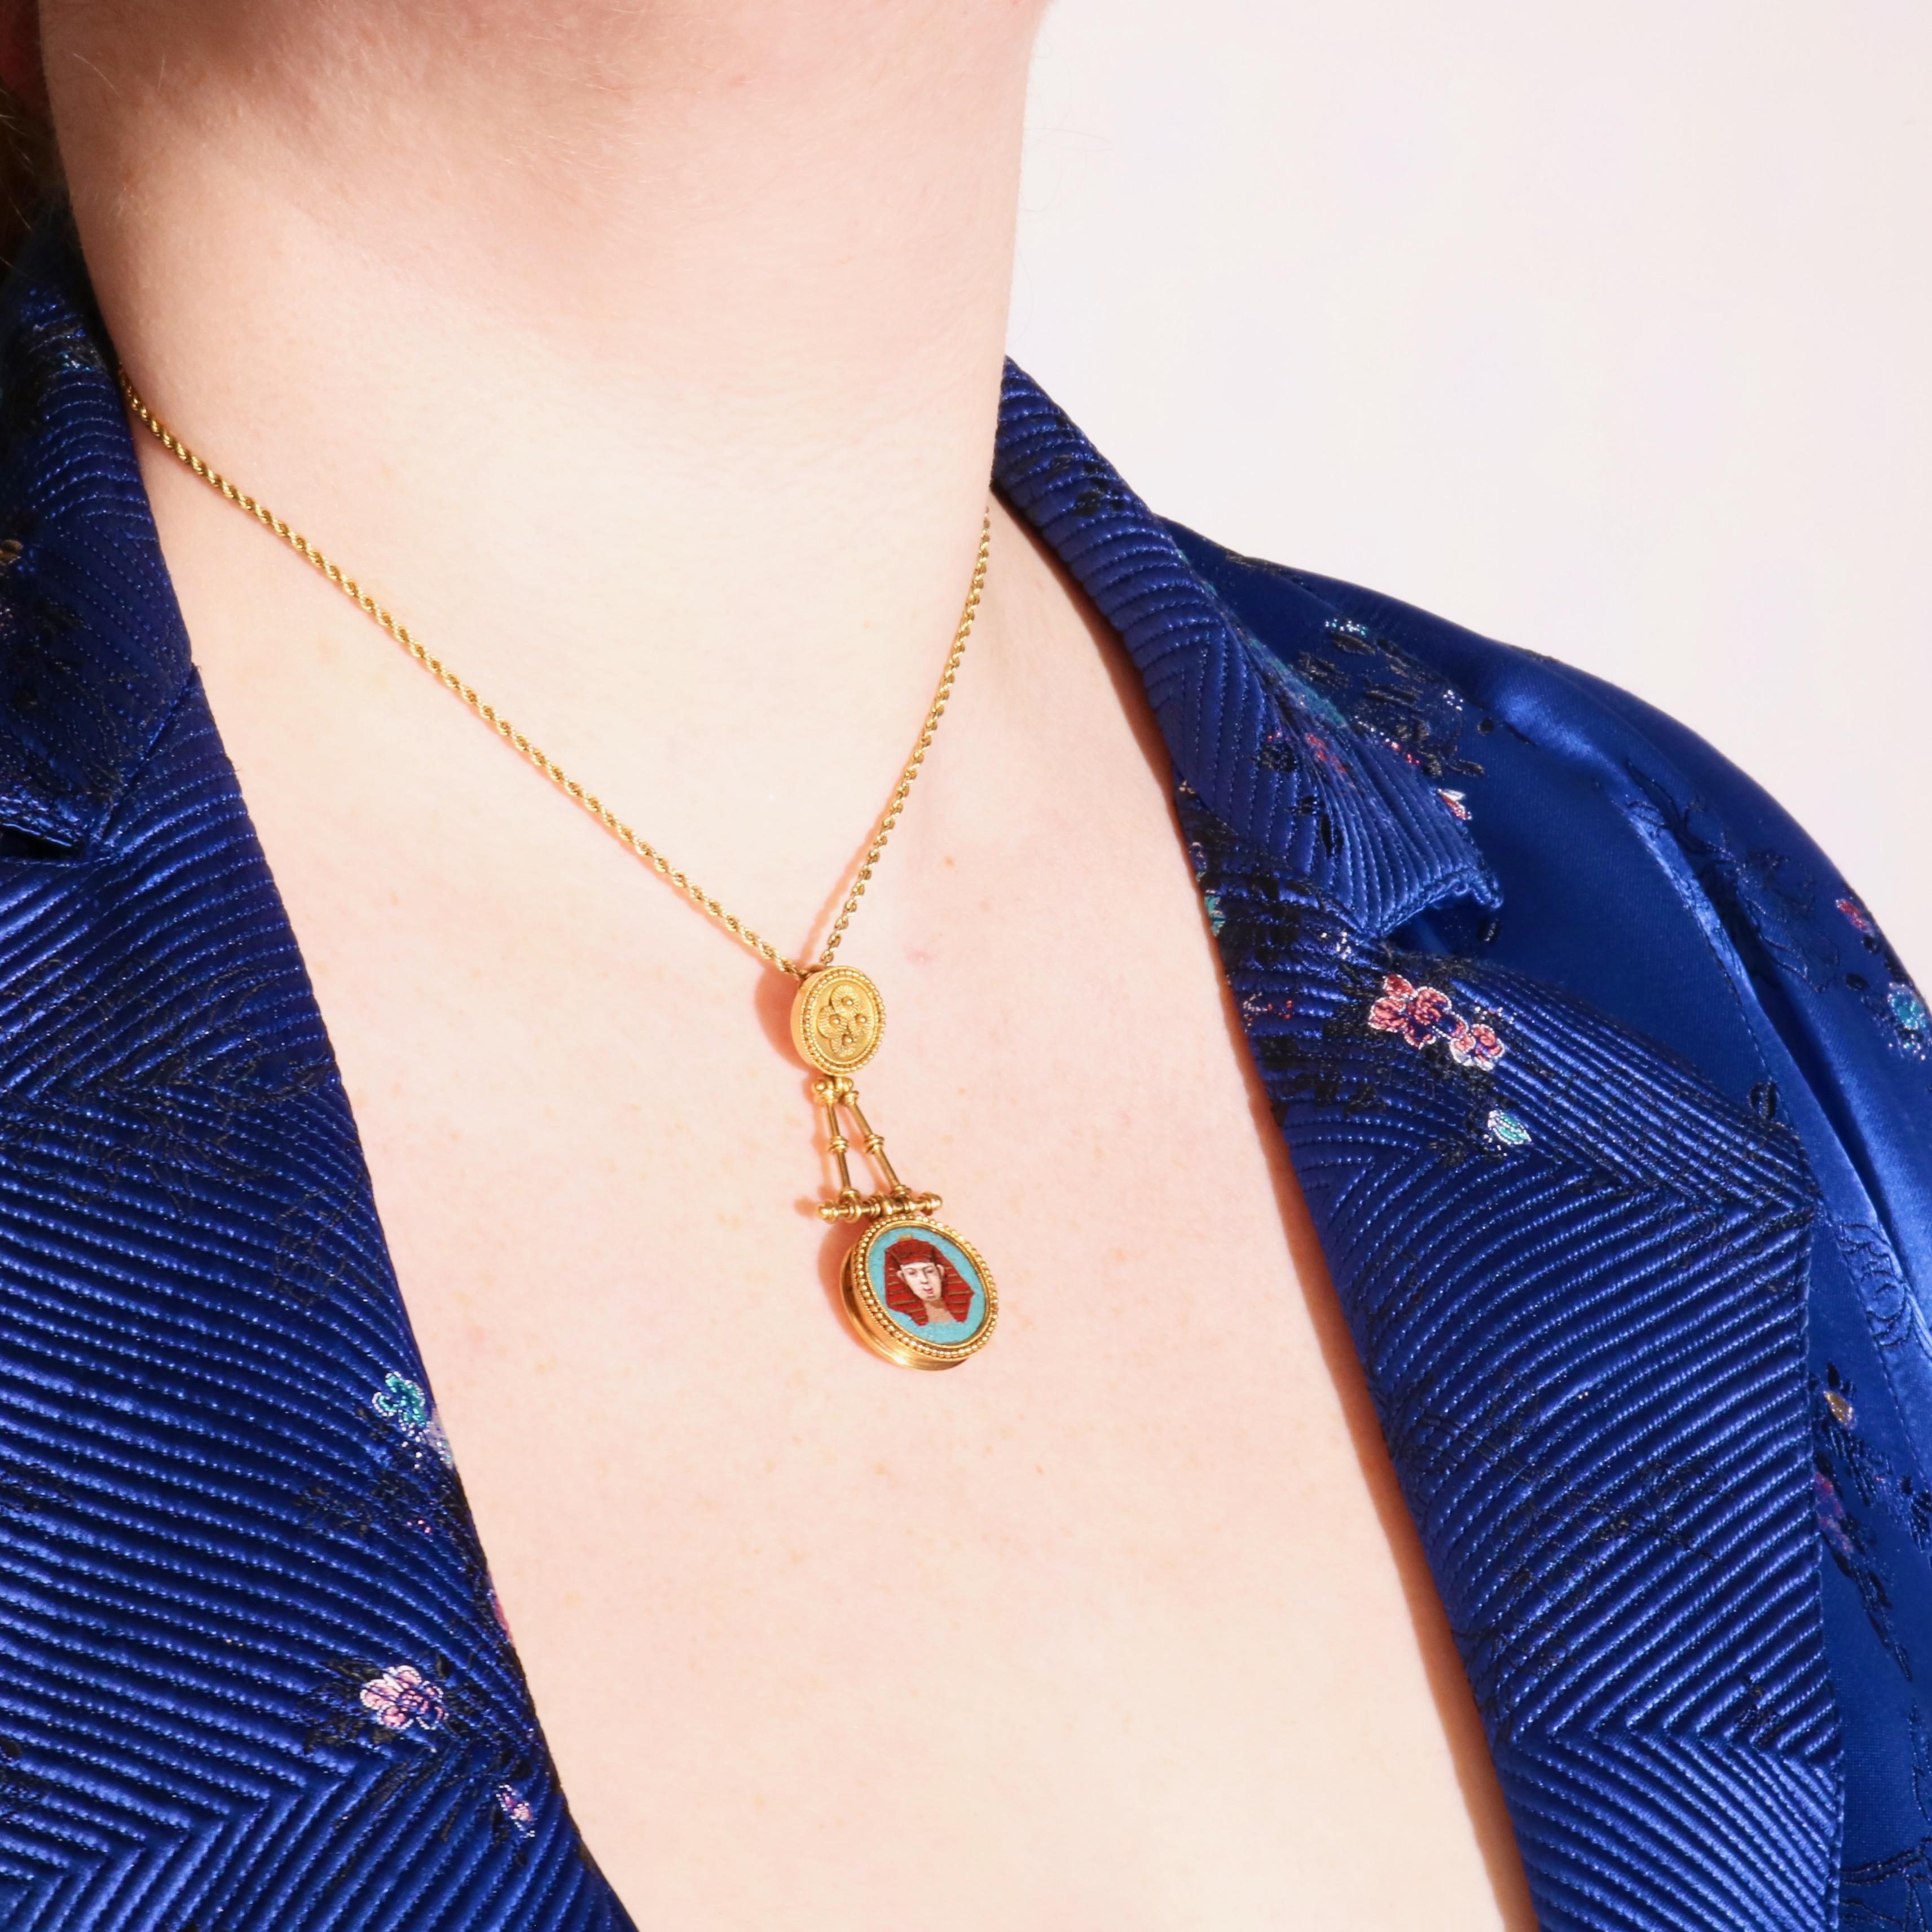 An antique yellow gold, and micro mosaic pendant, comprising tiny mosaic panels in varying vibrant colours, set in 18 karat yellow gold, with 18 karat yellow gold fittings. 

This pendant contains a beautiful, extremely fine depiction of an Egyptian